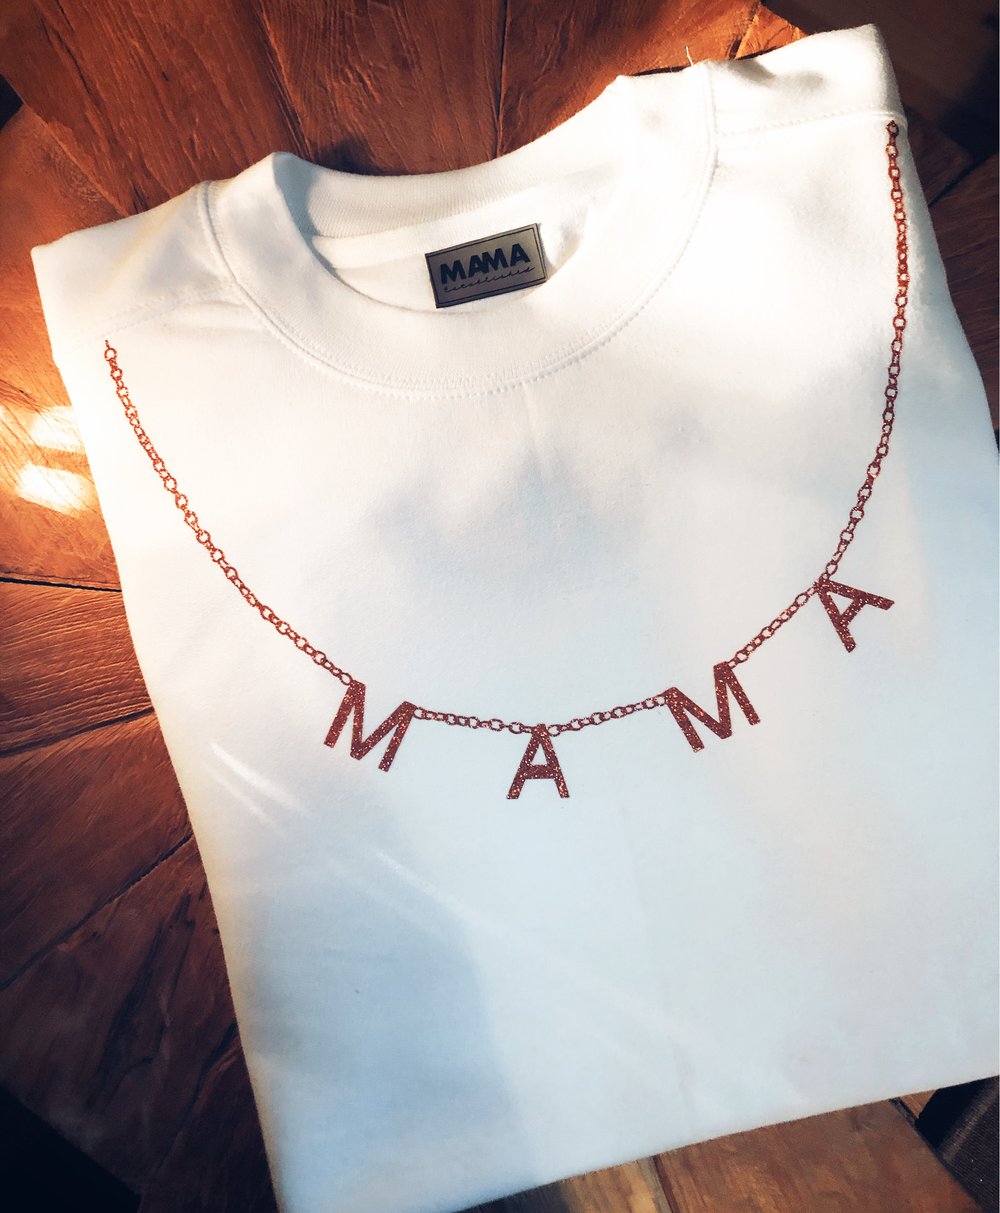 Image of Mama necklace detail sweater